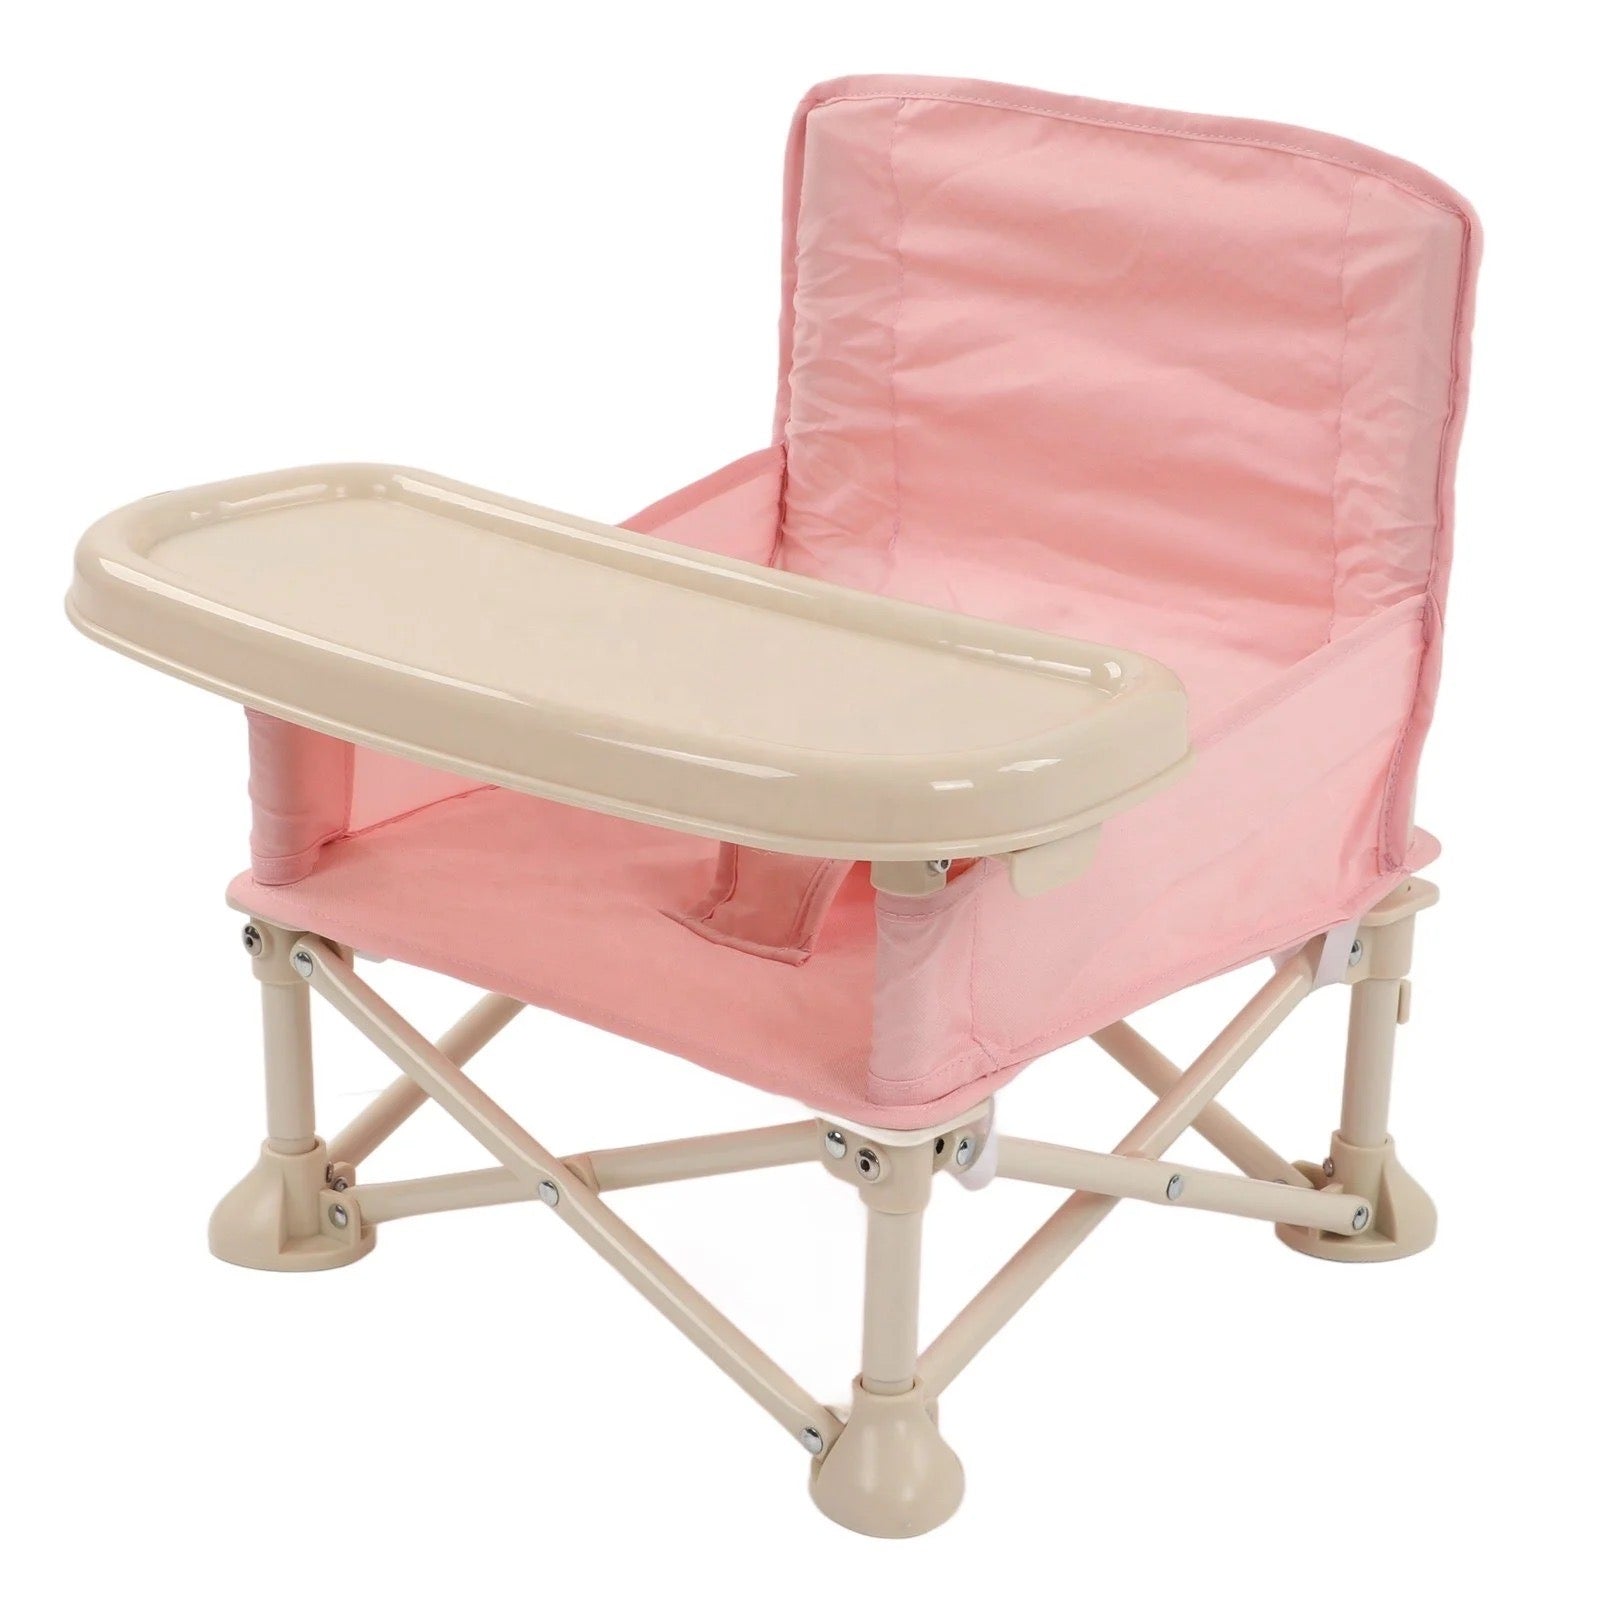 Baby & Toddler Portable Folding Travel & Activity Chair With Tray - Pink Color